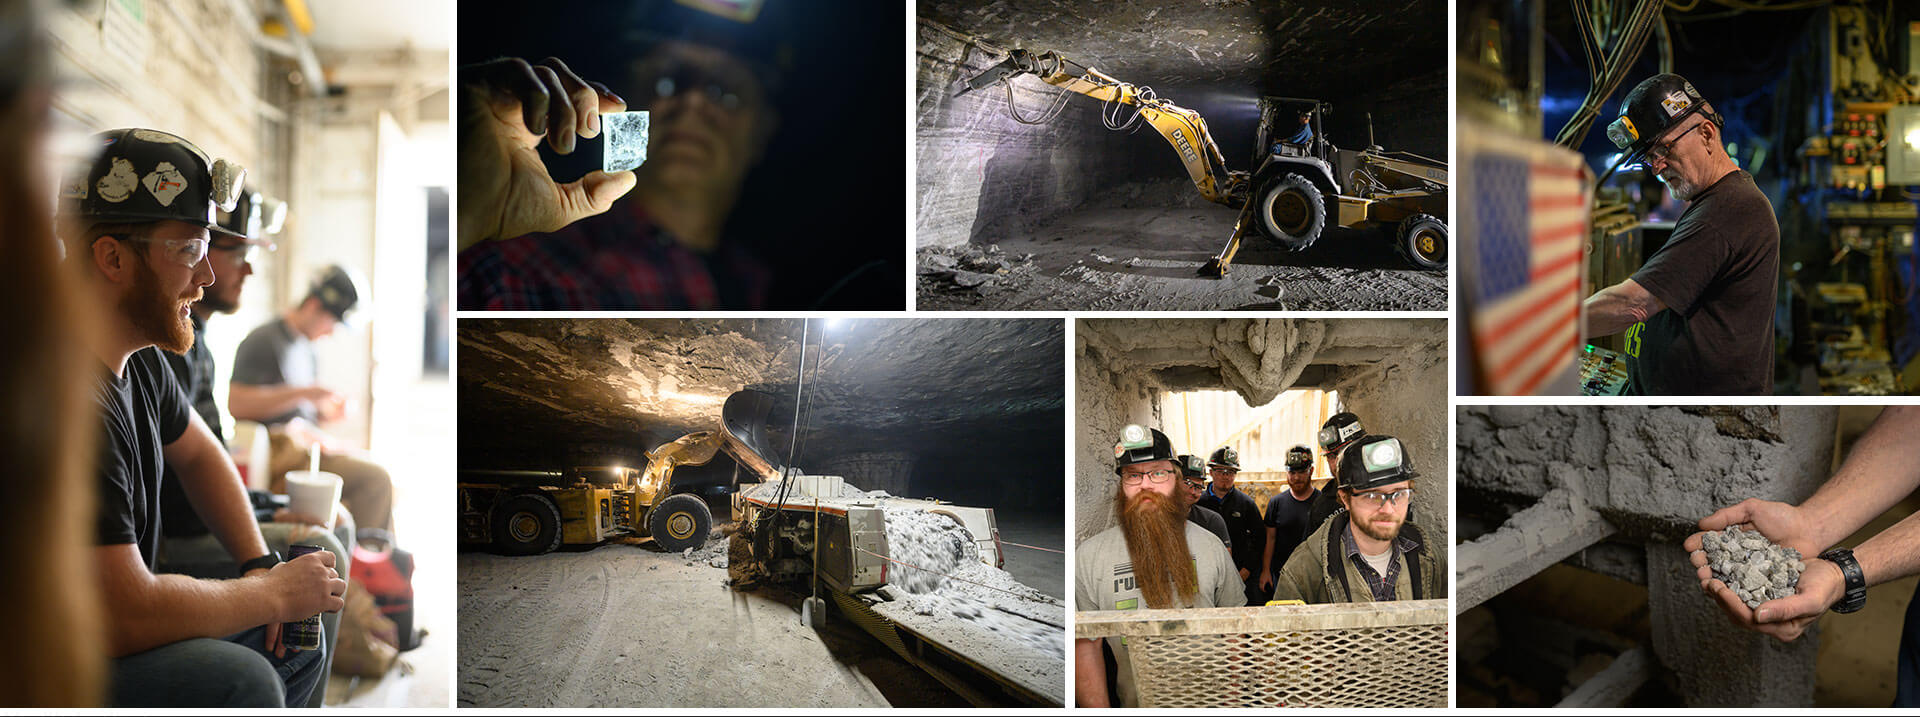 Collage of Images of Salt, Mining Process, and Team